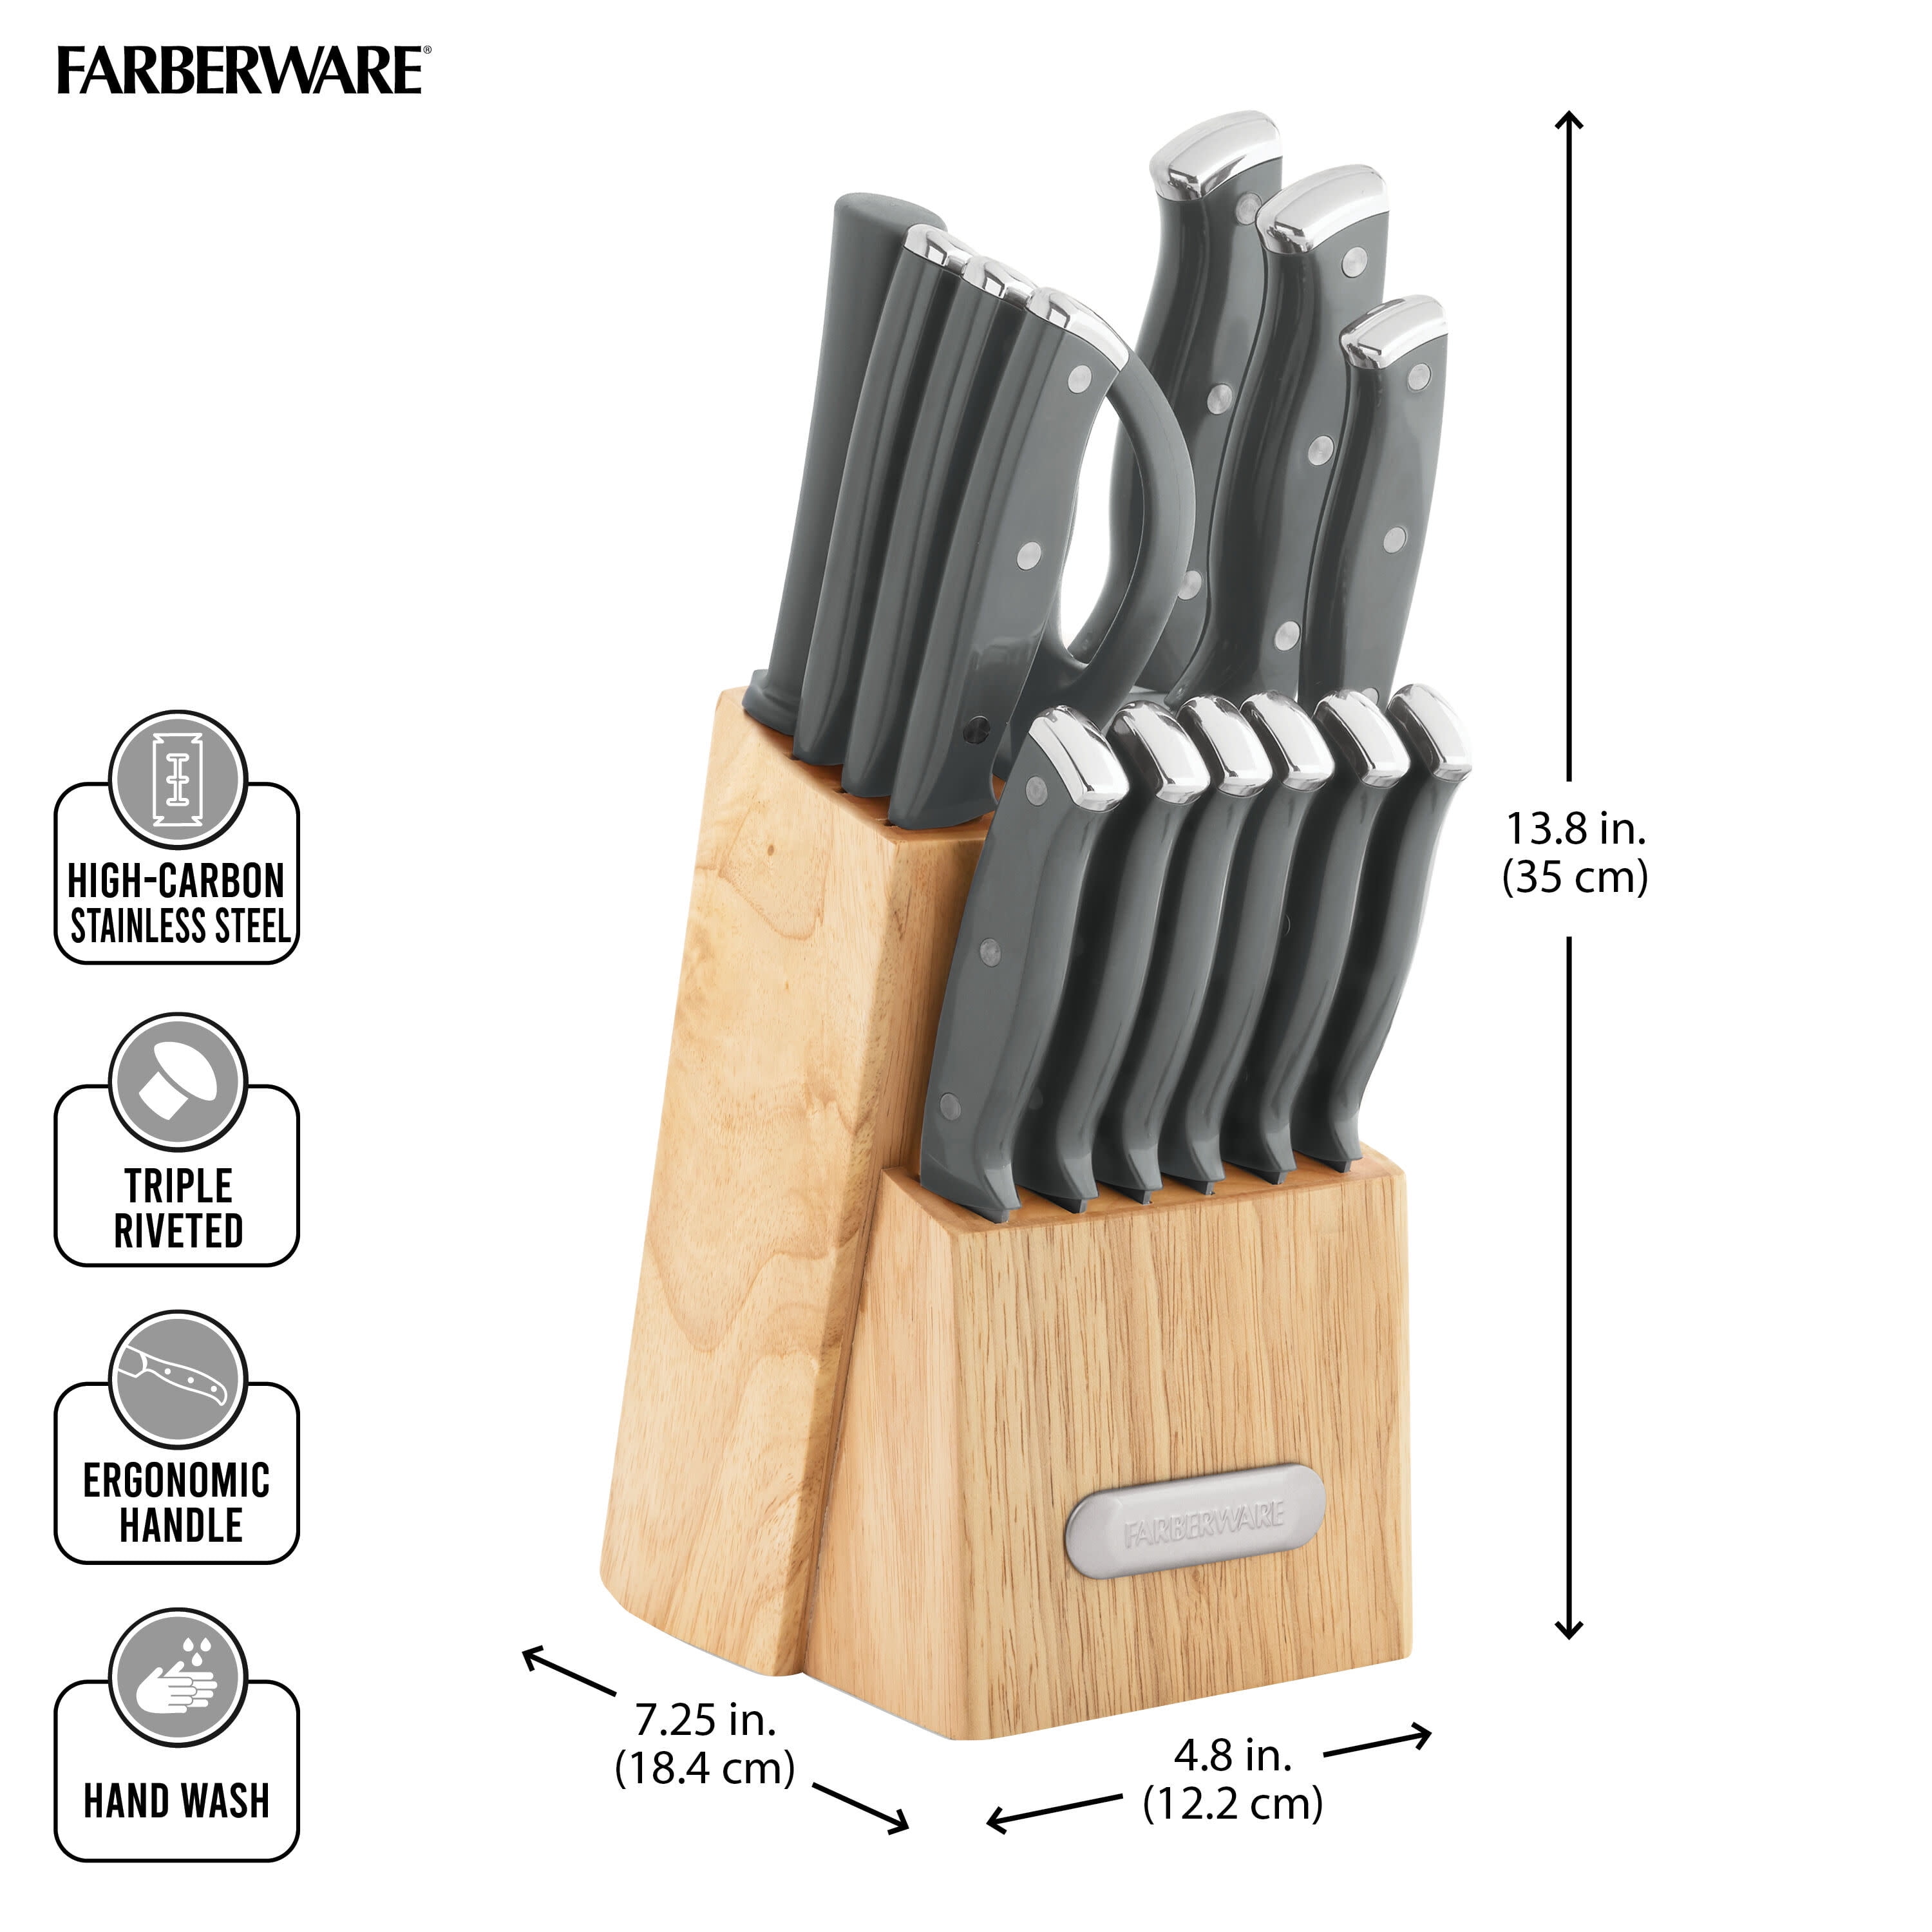 Farberware Triple Riveted Knife Block Set, 15-Piece, White and Gold